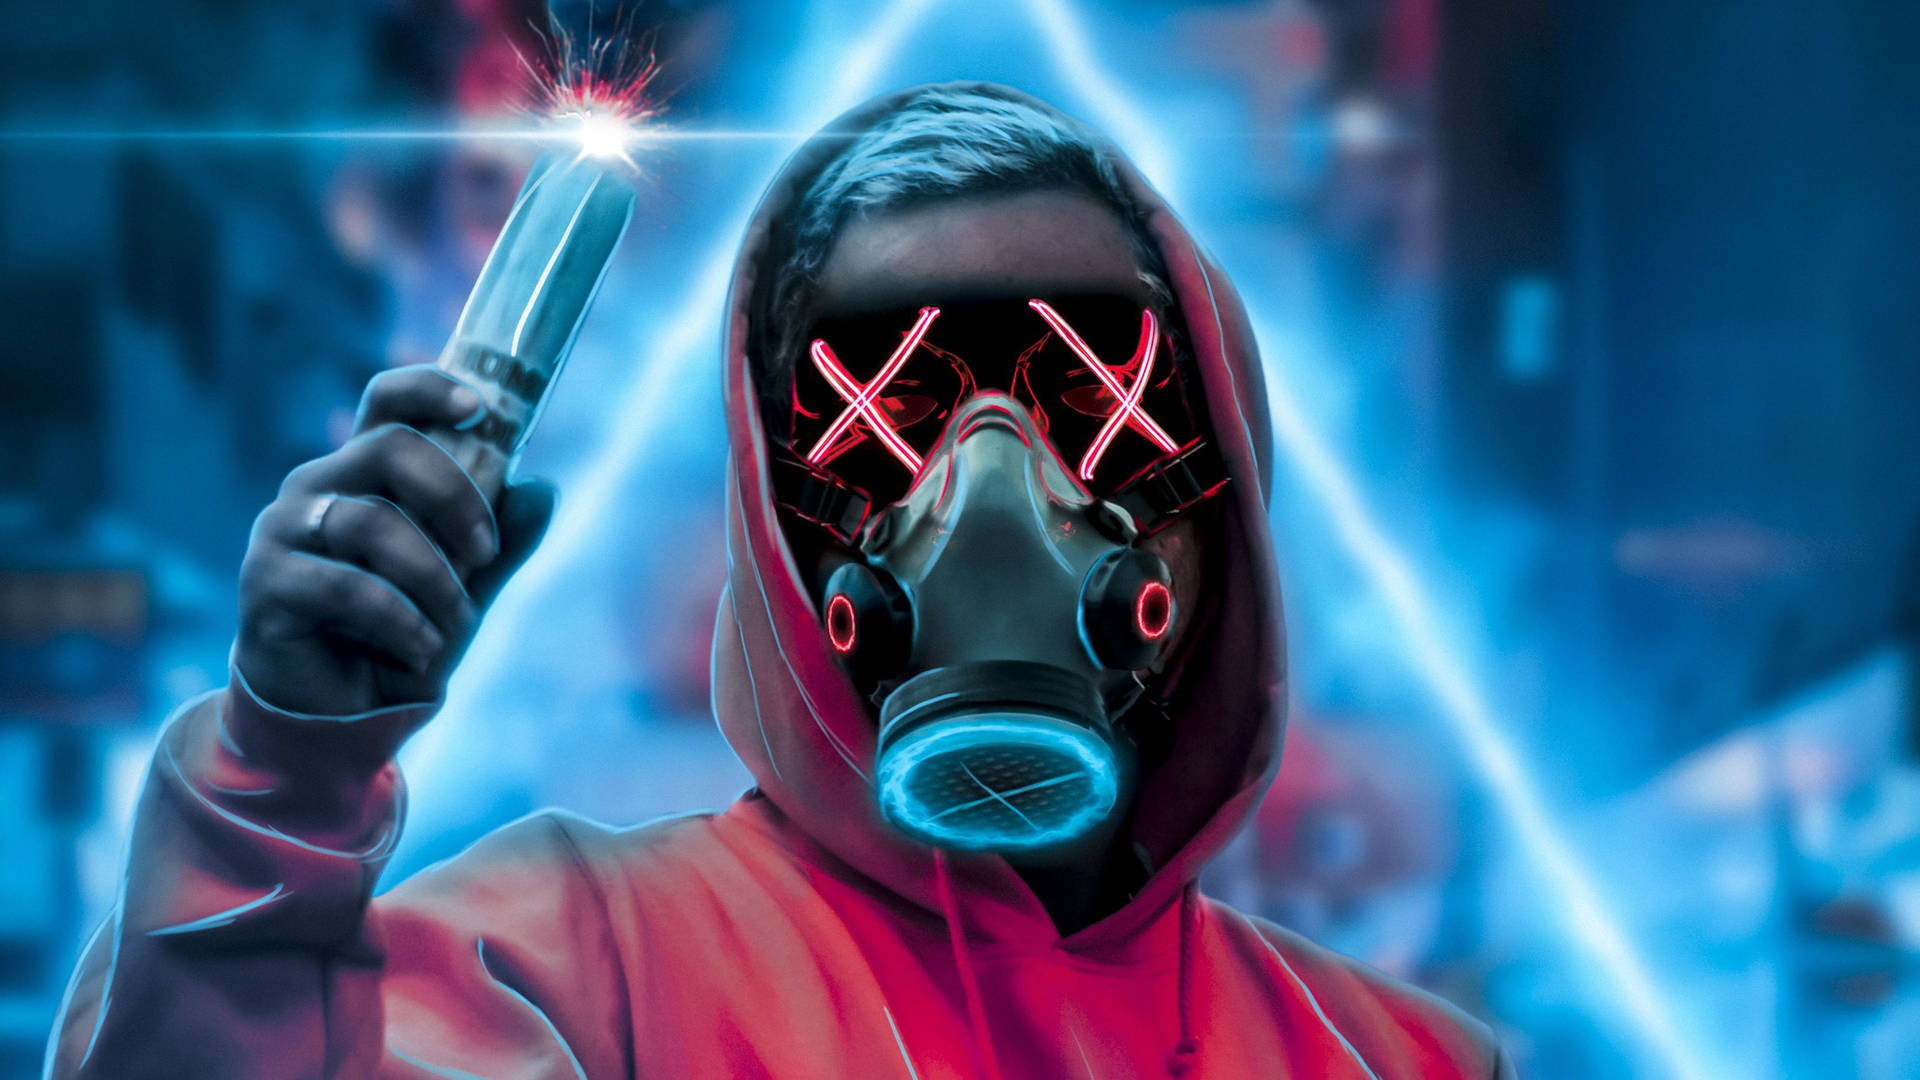 Man's Face Wearing Gas Mask Background